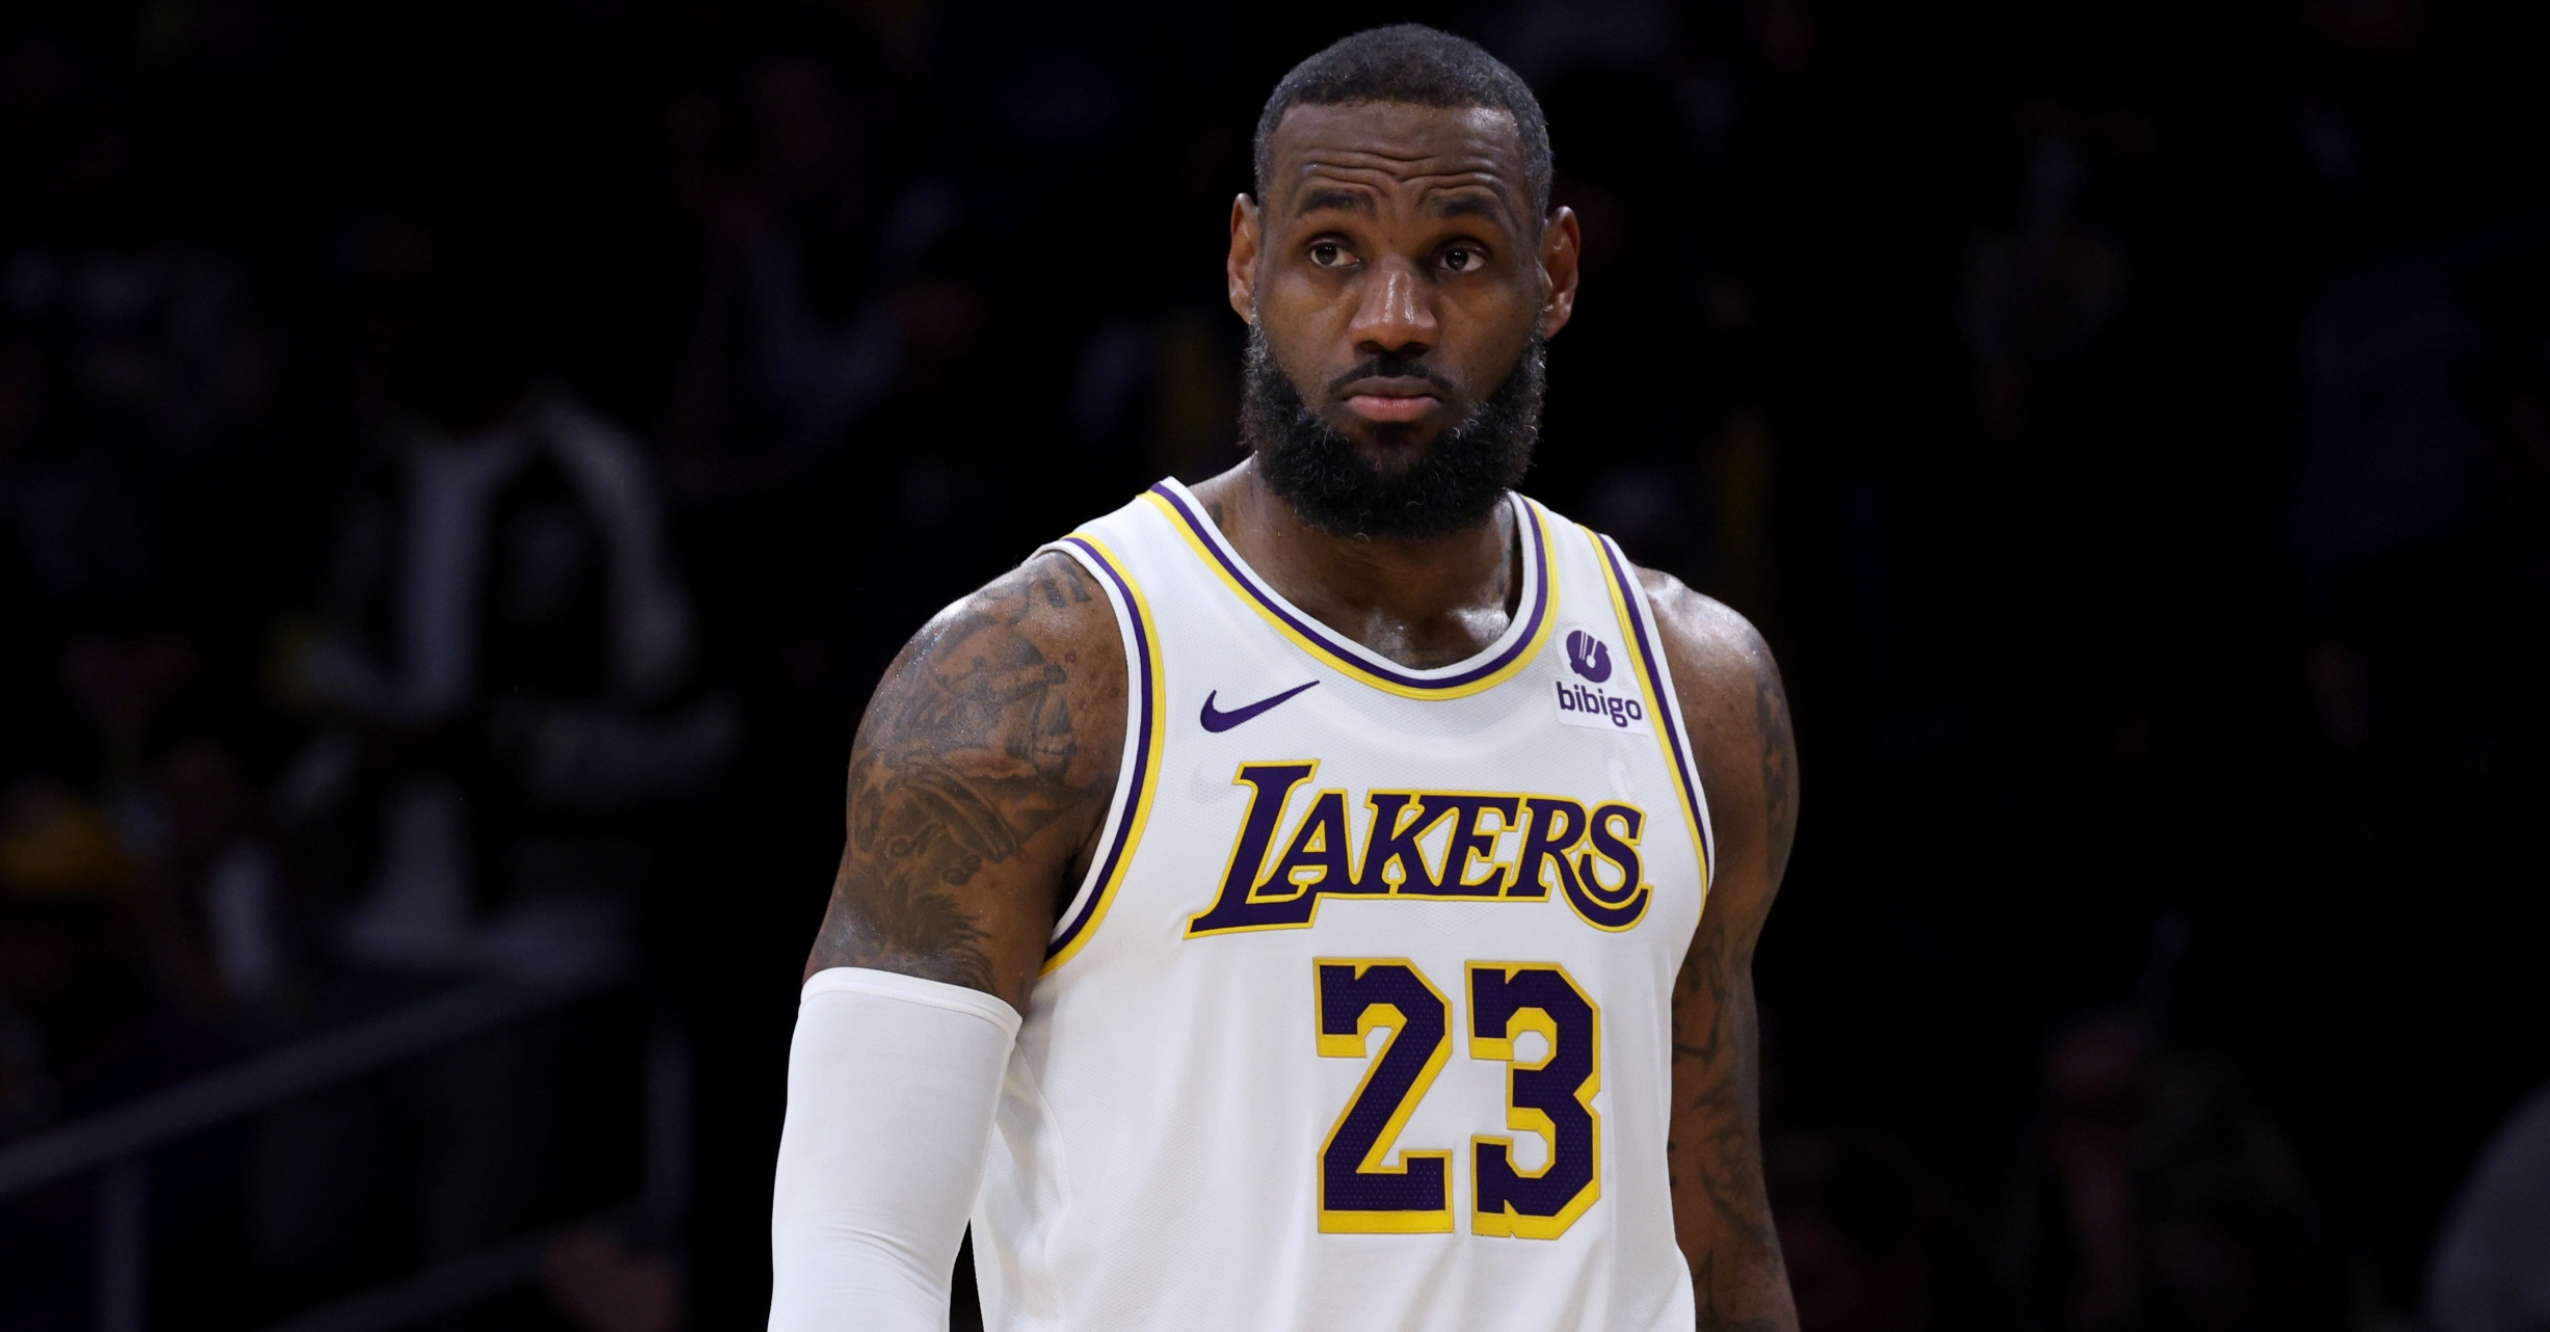 LeBron James Says He Doesn't 'Have Much Time Left' Playing In NBA